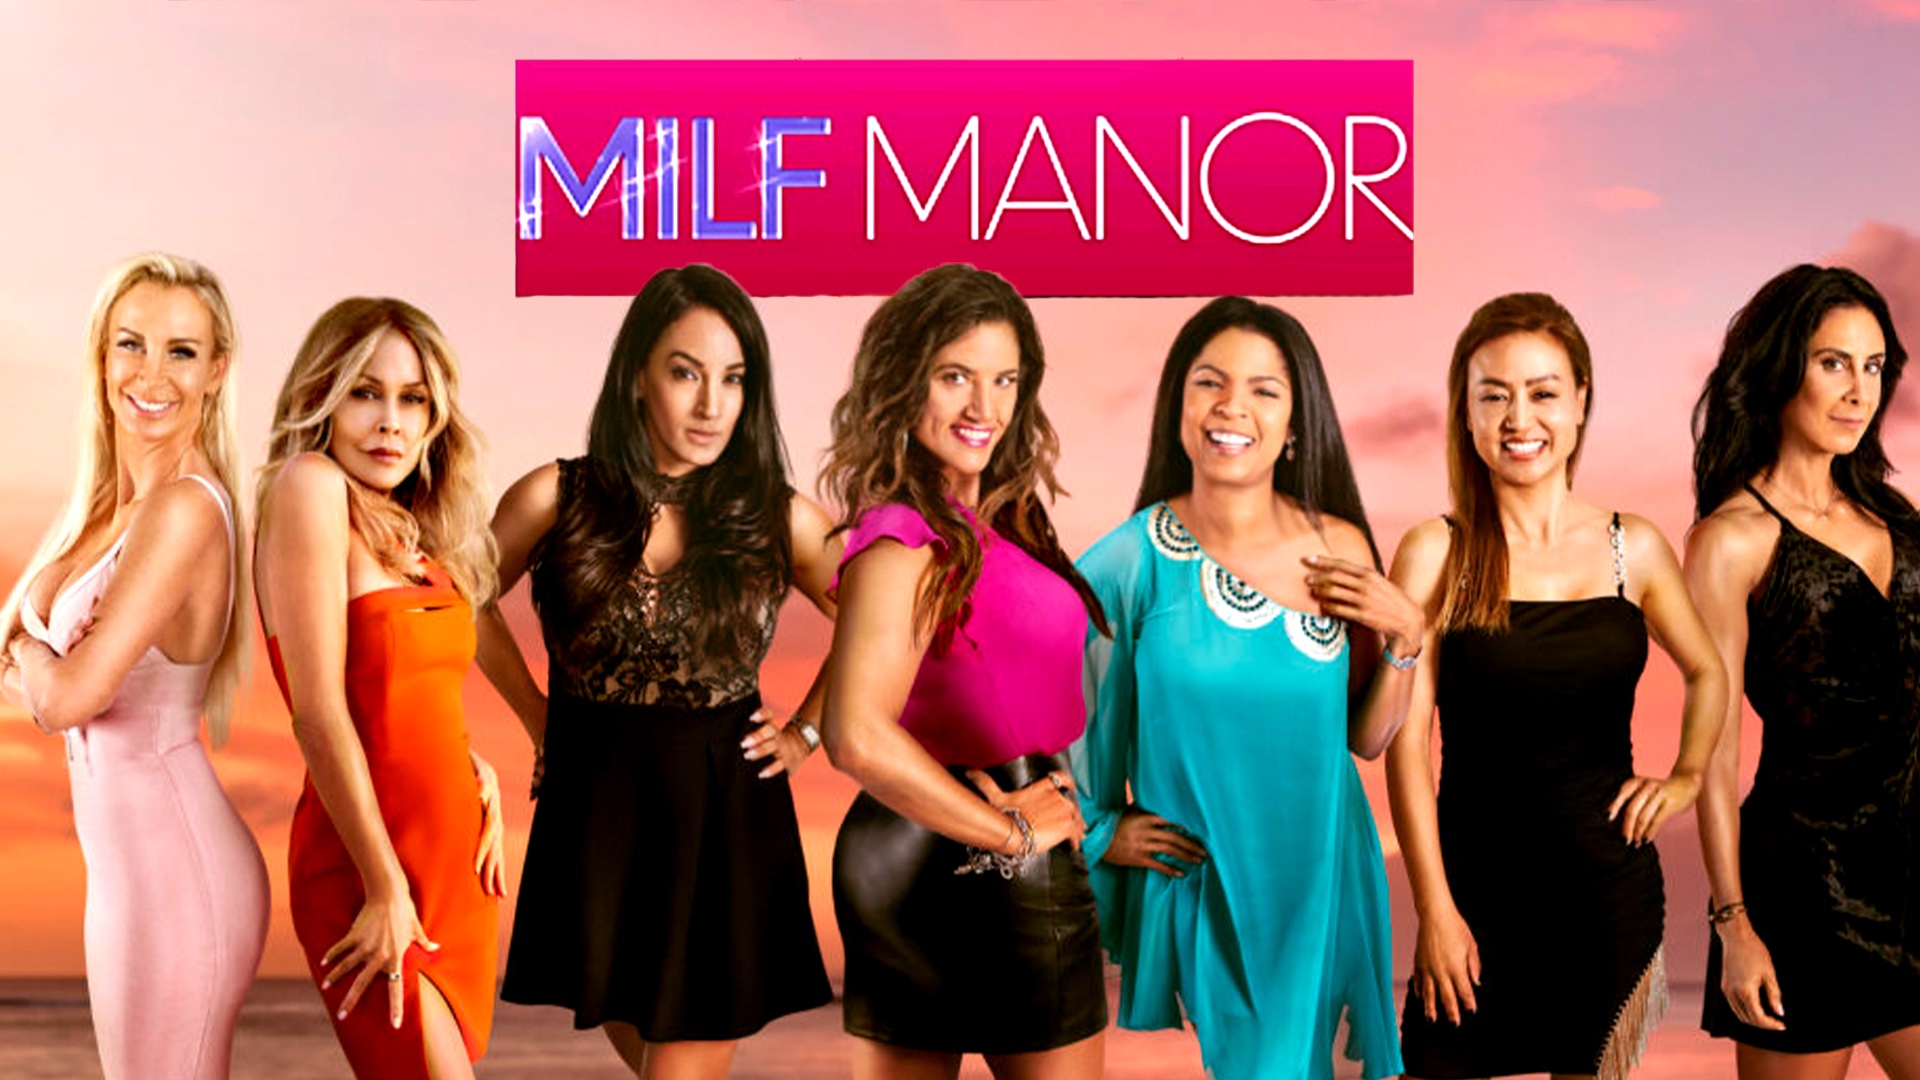 Heres Why Milf Manor Might Just Be The Most Cringe Tv Show Ever